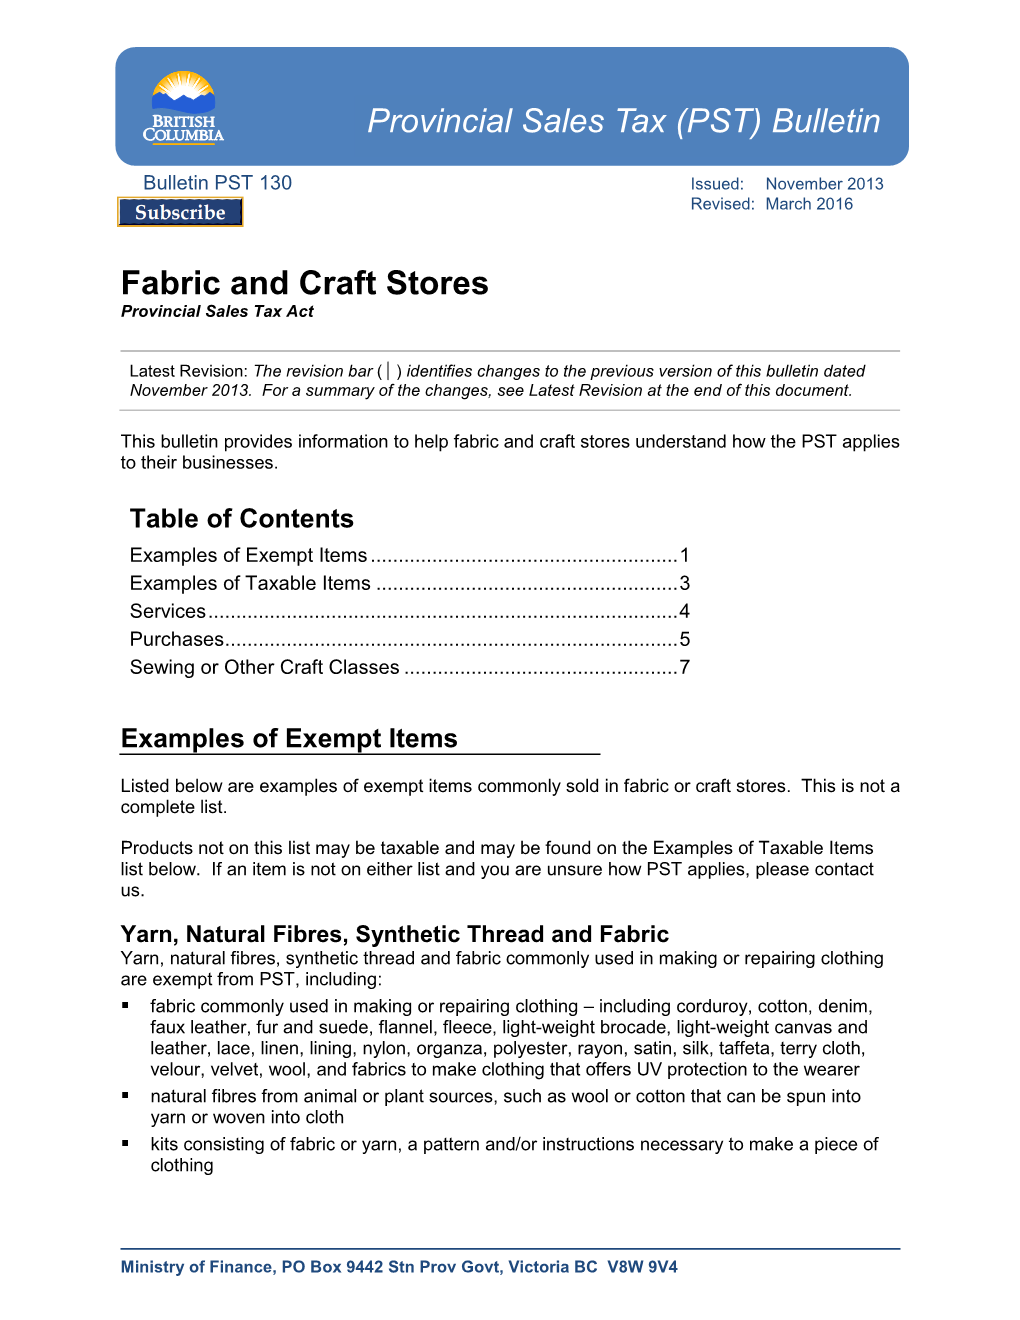 Bulletin PST 130, Fabric and Craft Stores